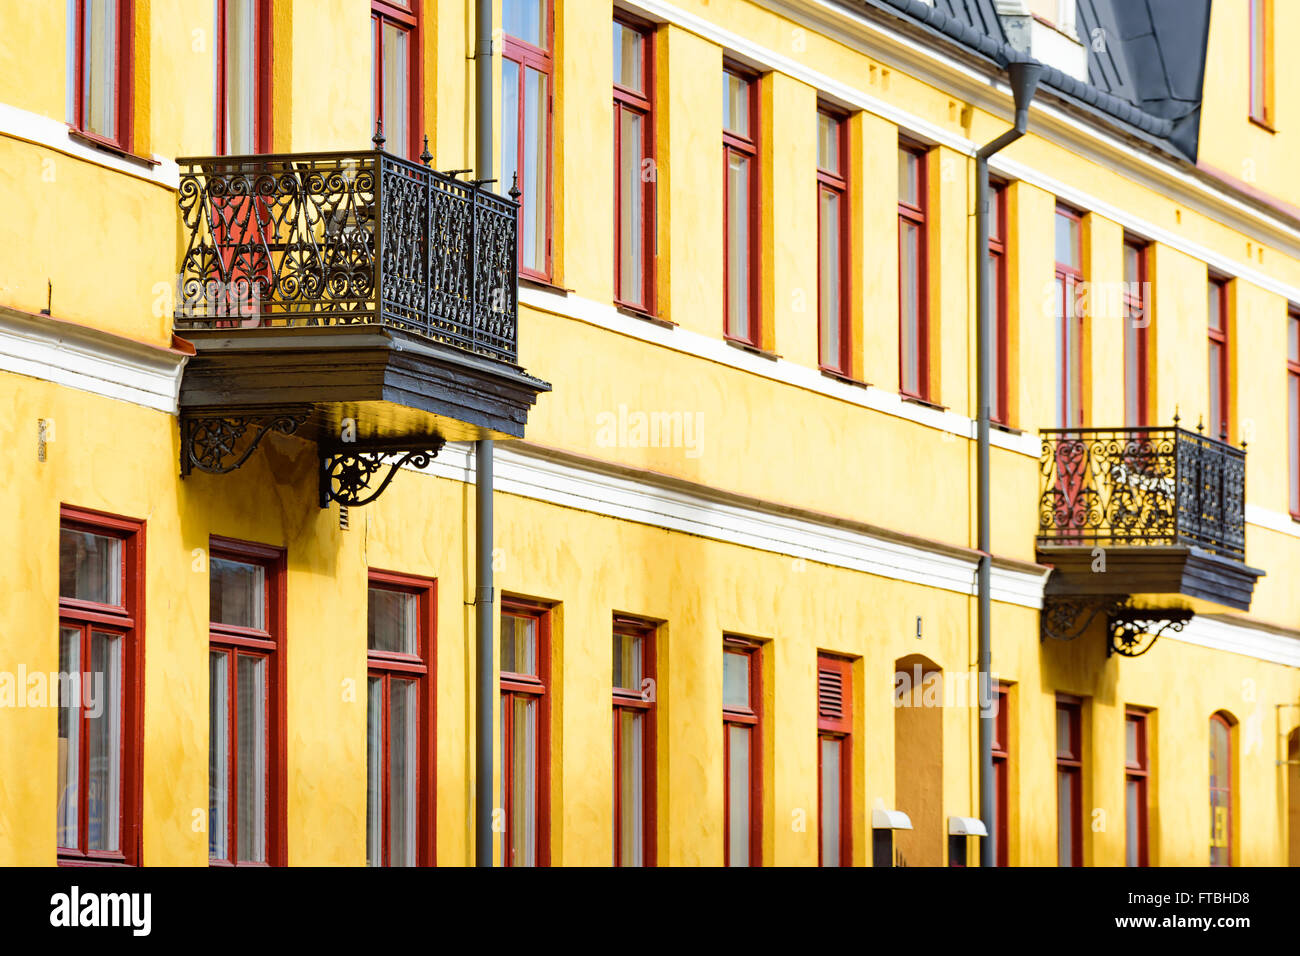 Two black metal balconies on a yellow building with red windows. Stock Photo